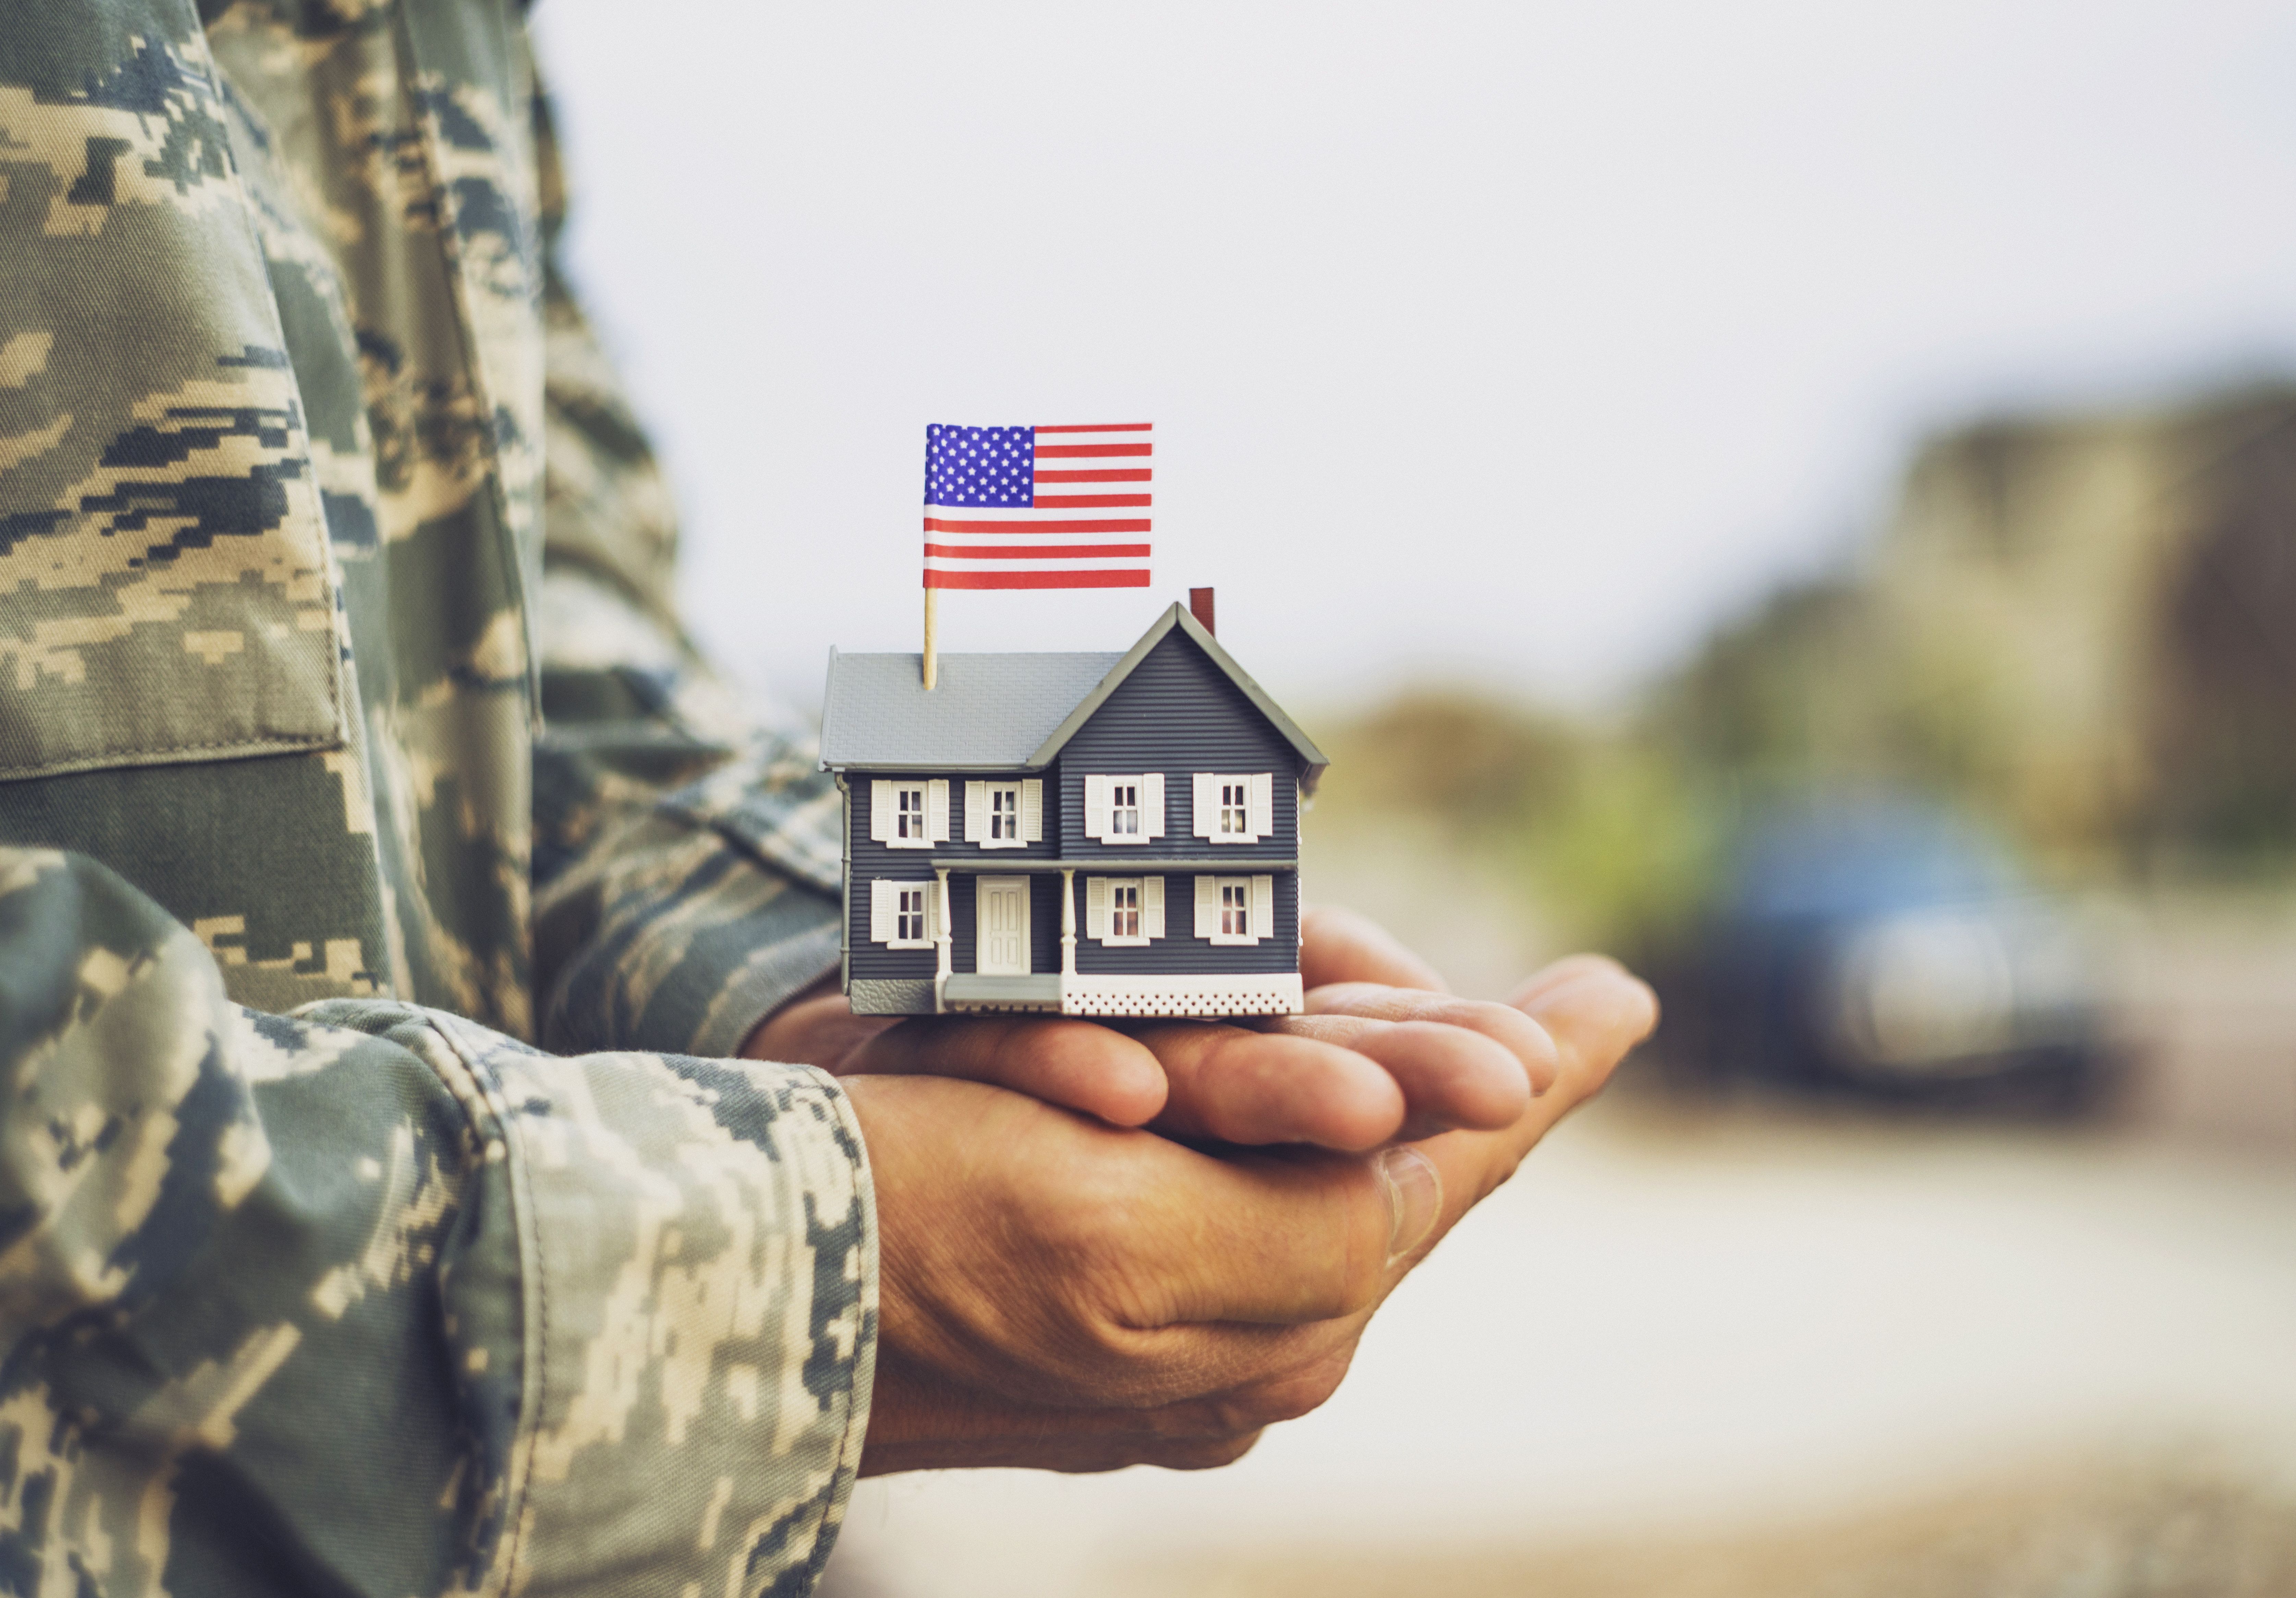 A veteran holds a home model with an American flag over his palm